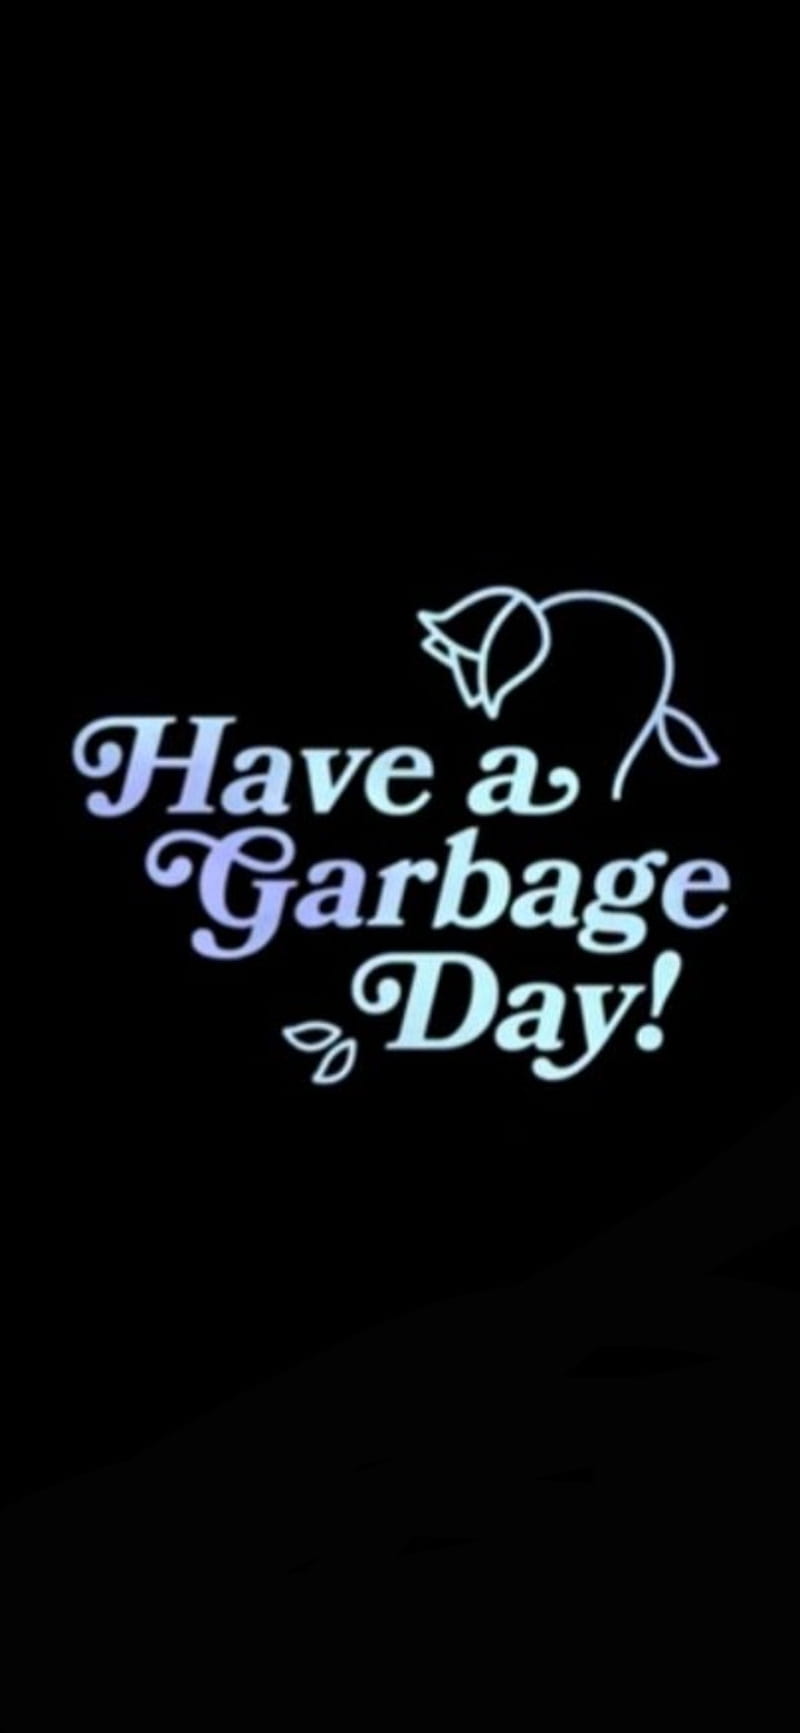 Have a garbage day, have a great day, HD phone wallpaper